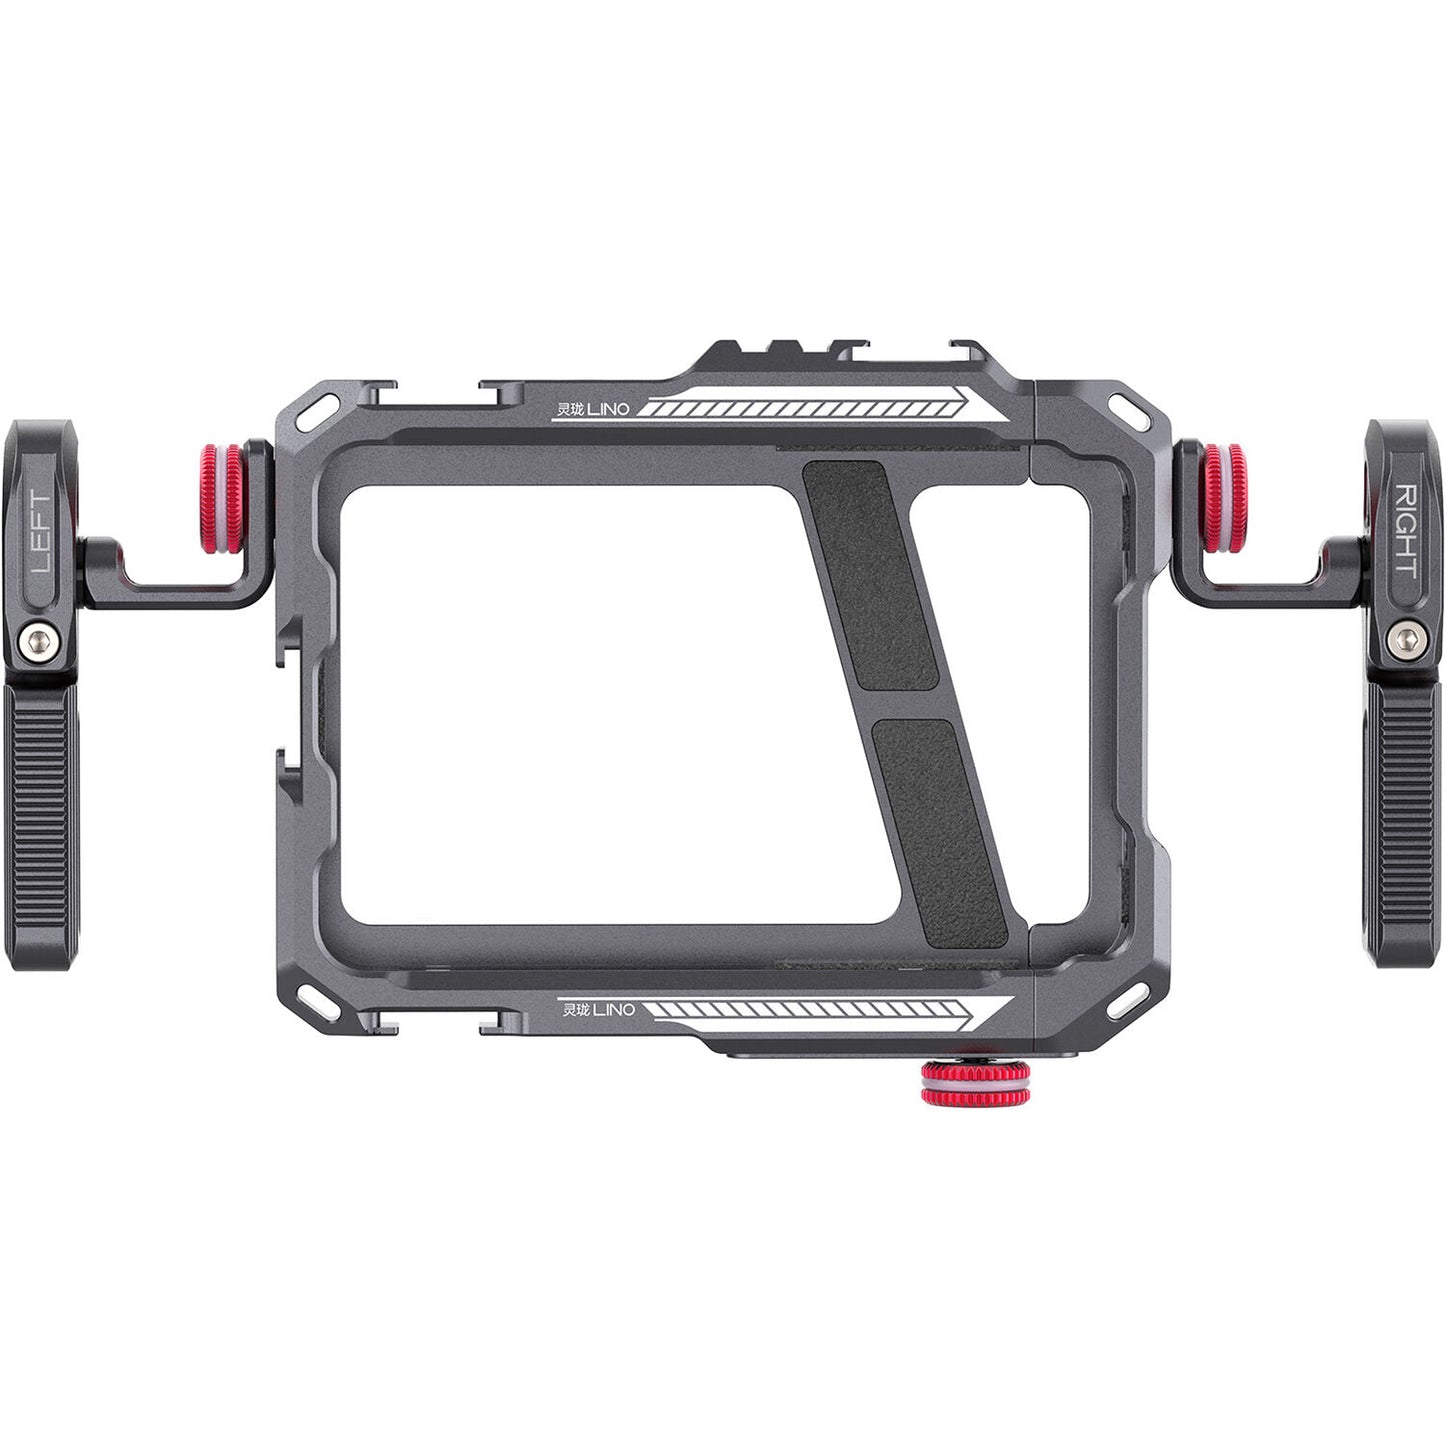 Ulanzi LINO Aluminum Smartphone Cage Dual Handle Rig 360 Adjustable with Cold Shoe, Rubber Gaskets for 5.4 to 6.7" Mobile Phones Vlogging Livestreaming